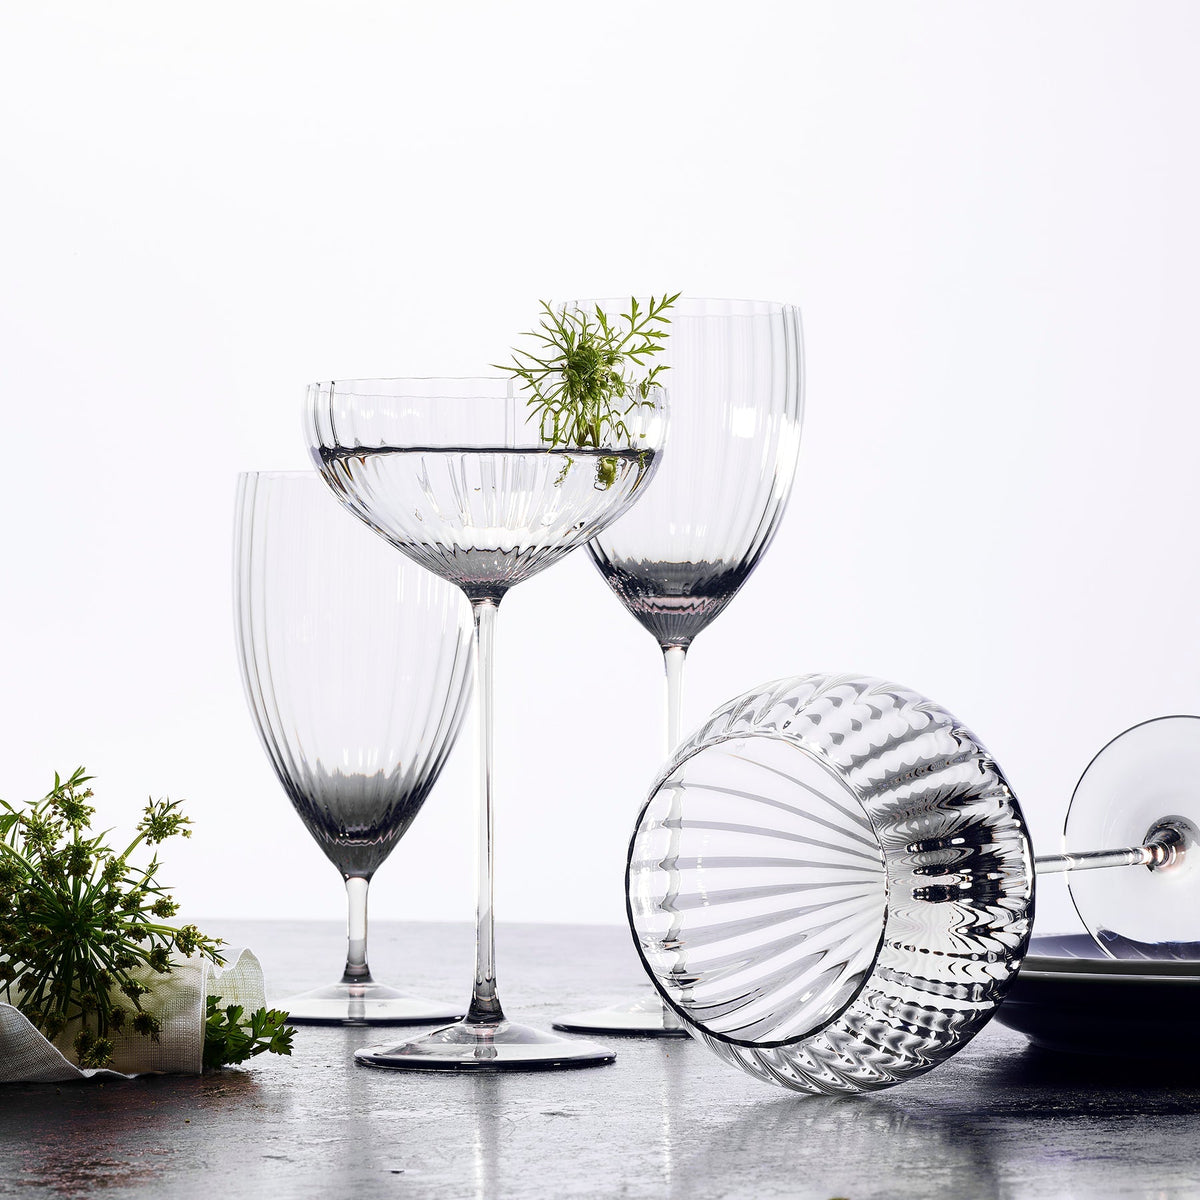 A set of Quinn Clear Everyday Glasses with flowers and greenery on a Caskata Artisanal Home table in Czech Republic.